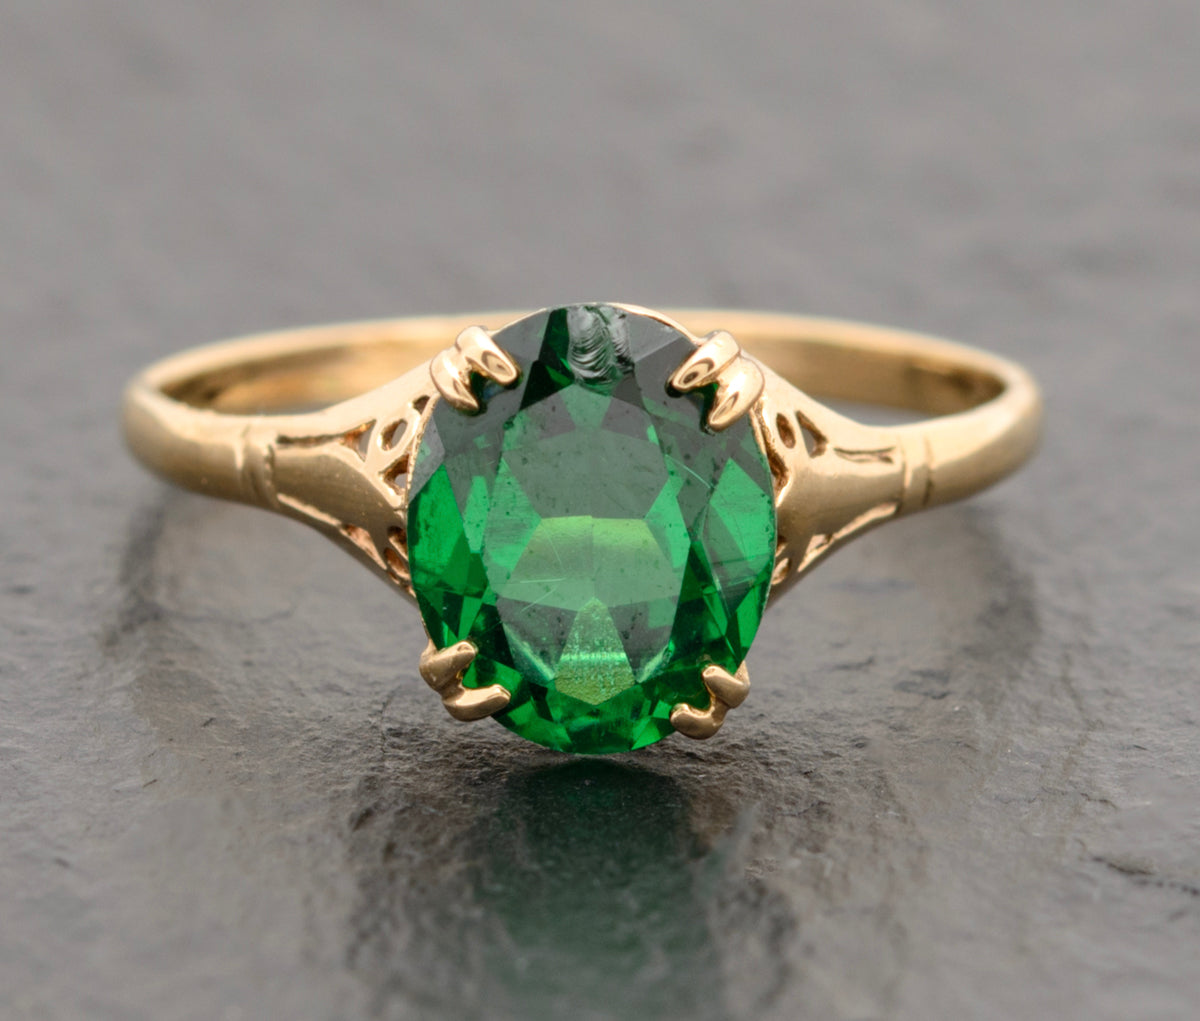 Vintage 9ct Gold Ring With Soude Emerald Gemstone UK Size S  (A1744)